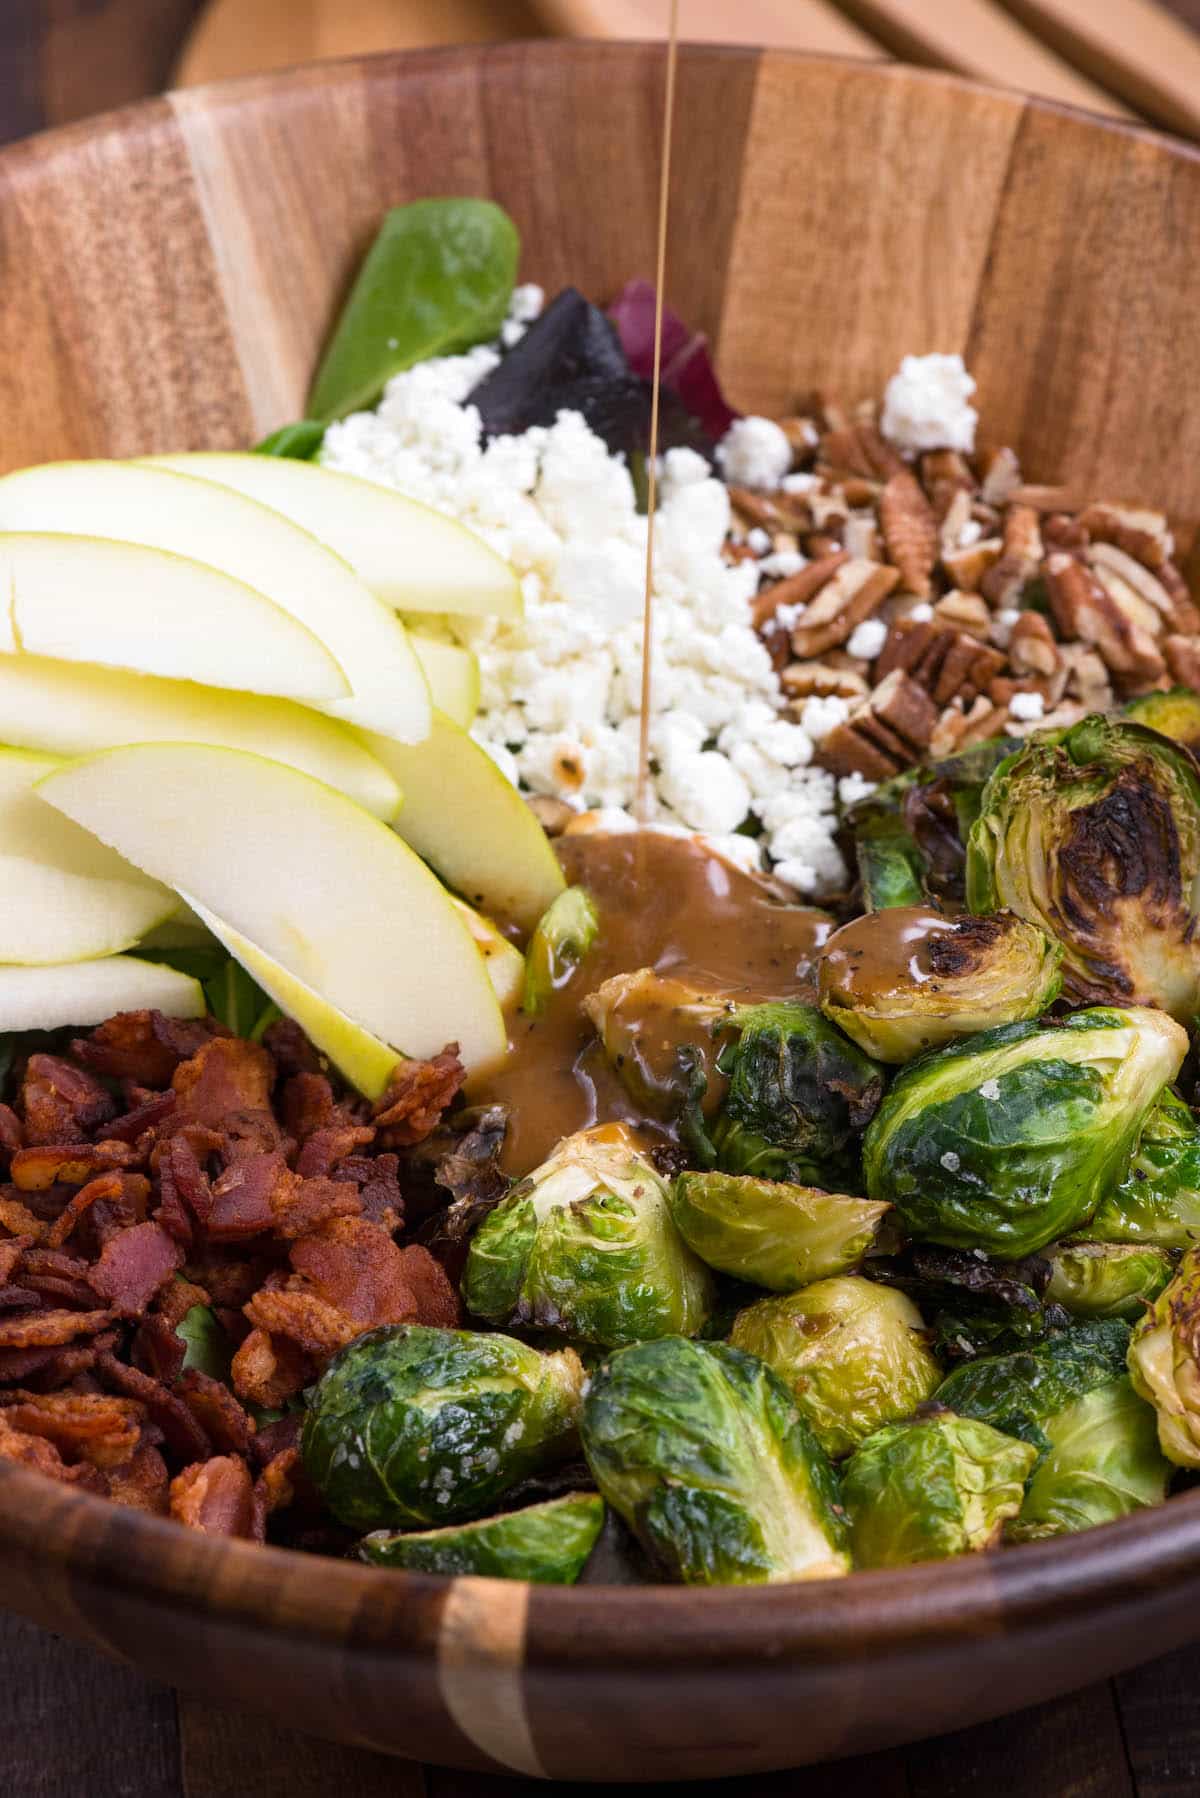 brussel sprout salad with all the ingredients including apples, Brussel sprouts, cheese, and bacon separated in a wooden bowl with dressing poured on top